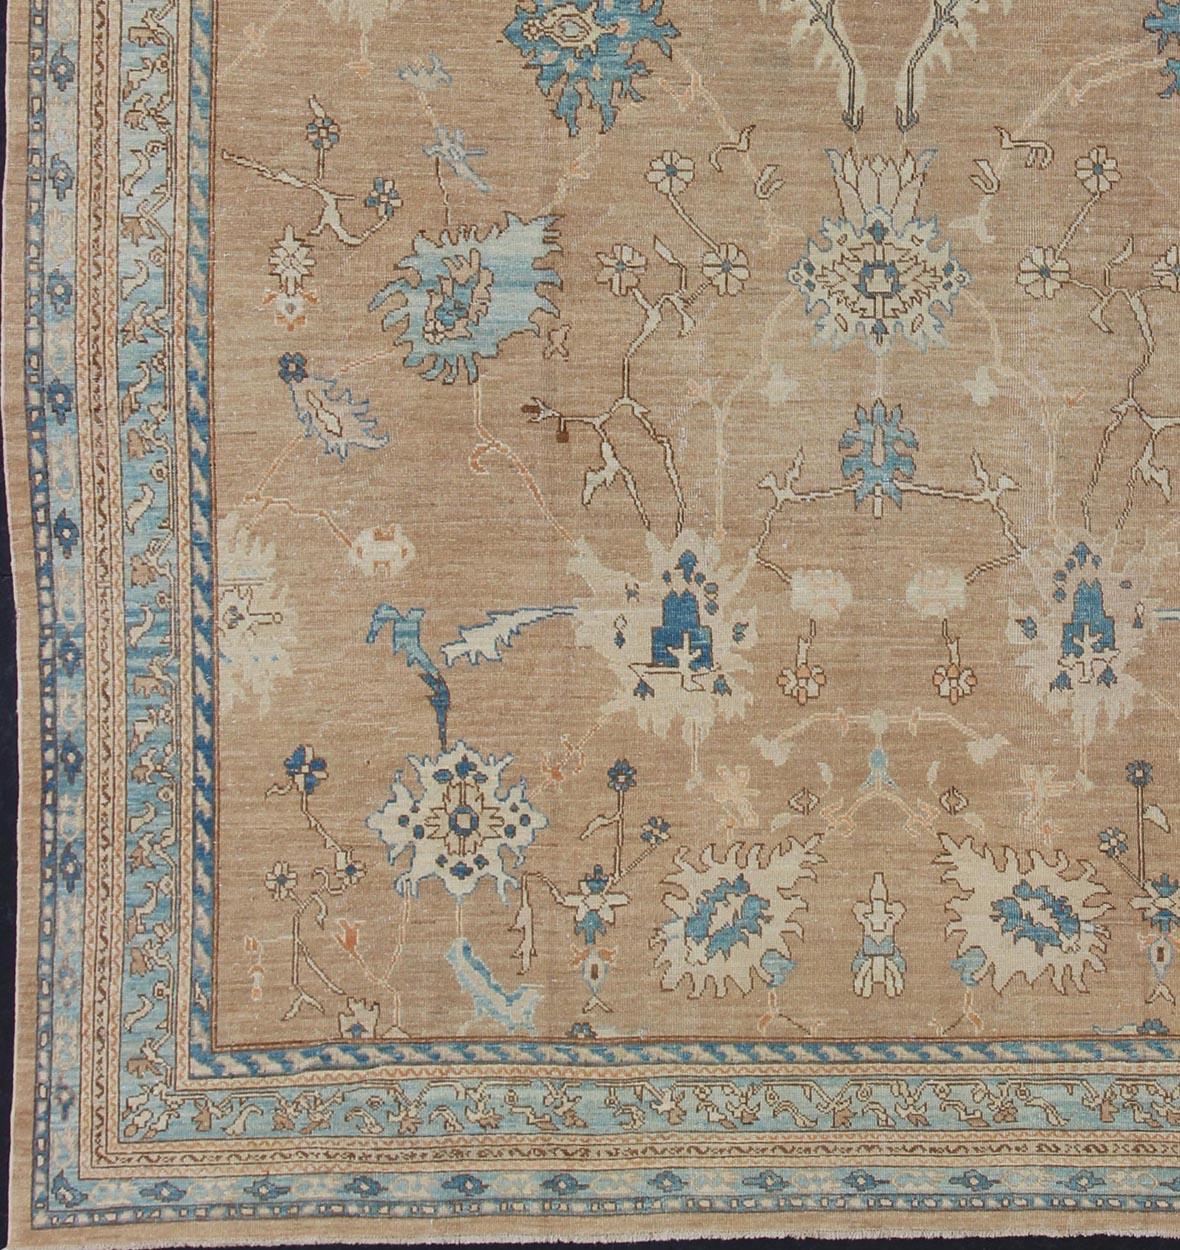 Keivan Woven Arts-Vintage Oushak design rug,  with fine Ghazni wool, made in Afghanistan, in tan, blue, neutral color palette and all-over flower design, rug 1912-258, country of origin / type: Afghan / Oushak

This traditional Oushak rug from